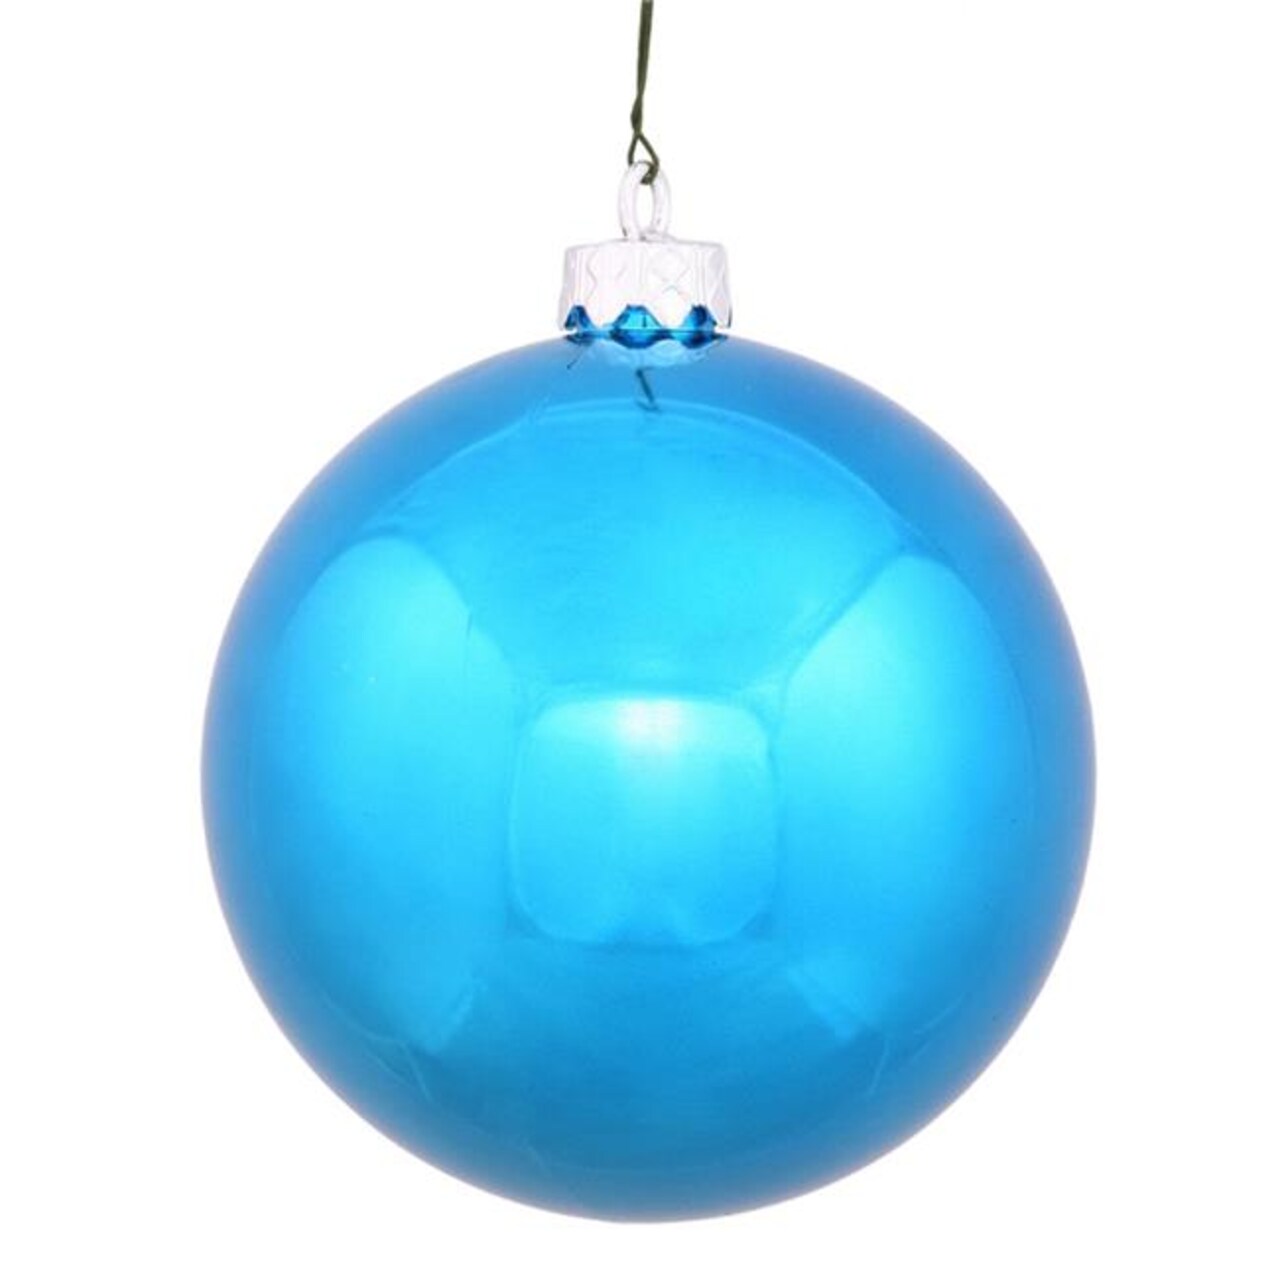 Vickerman 31749083 Shiny Turquoise UV Resistant Commercial Drilled Shatterproof Christmas Ball Ornament - 2.75 in.